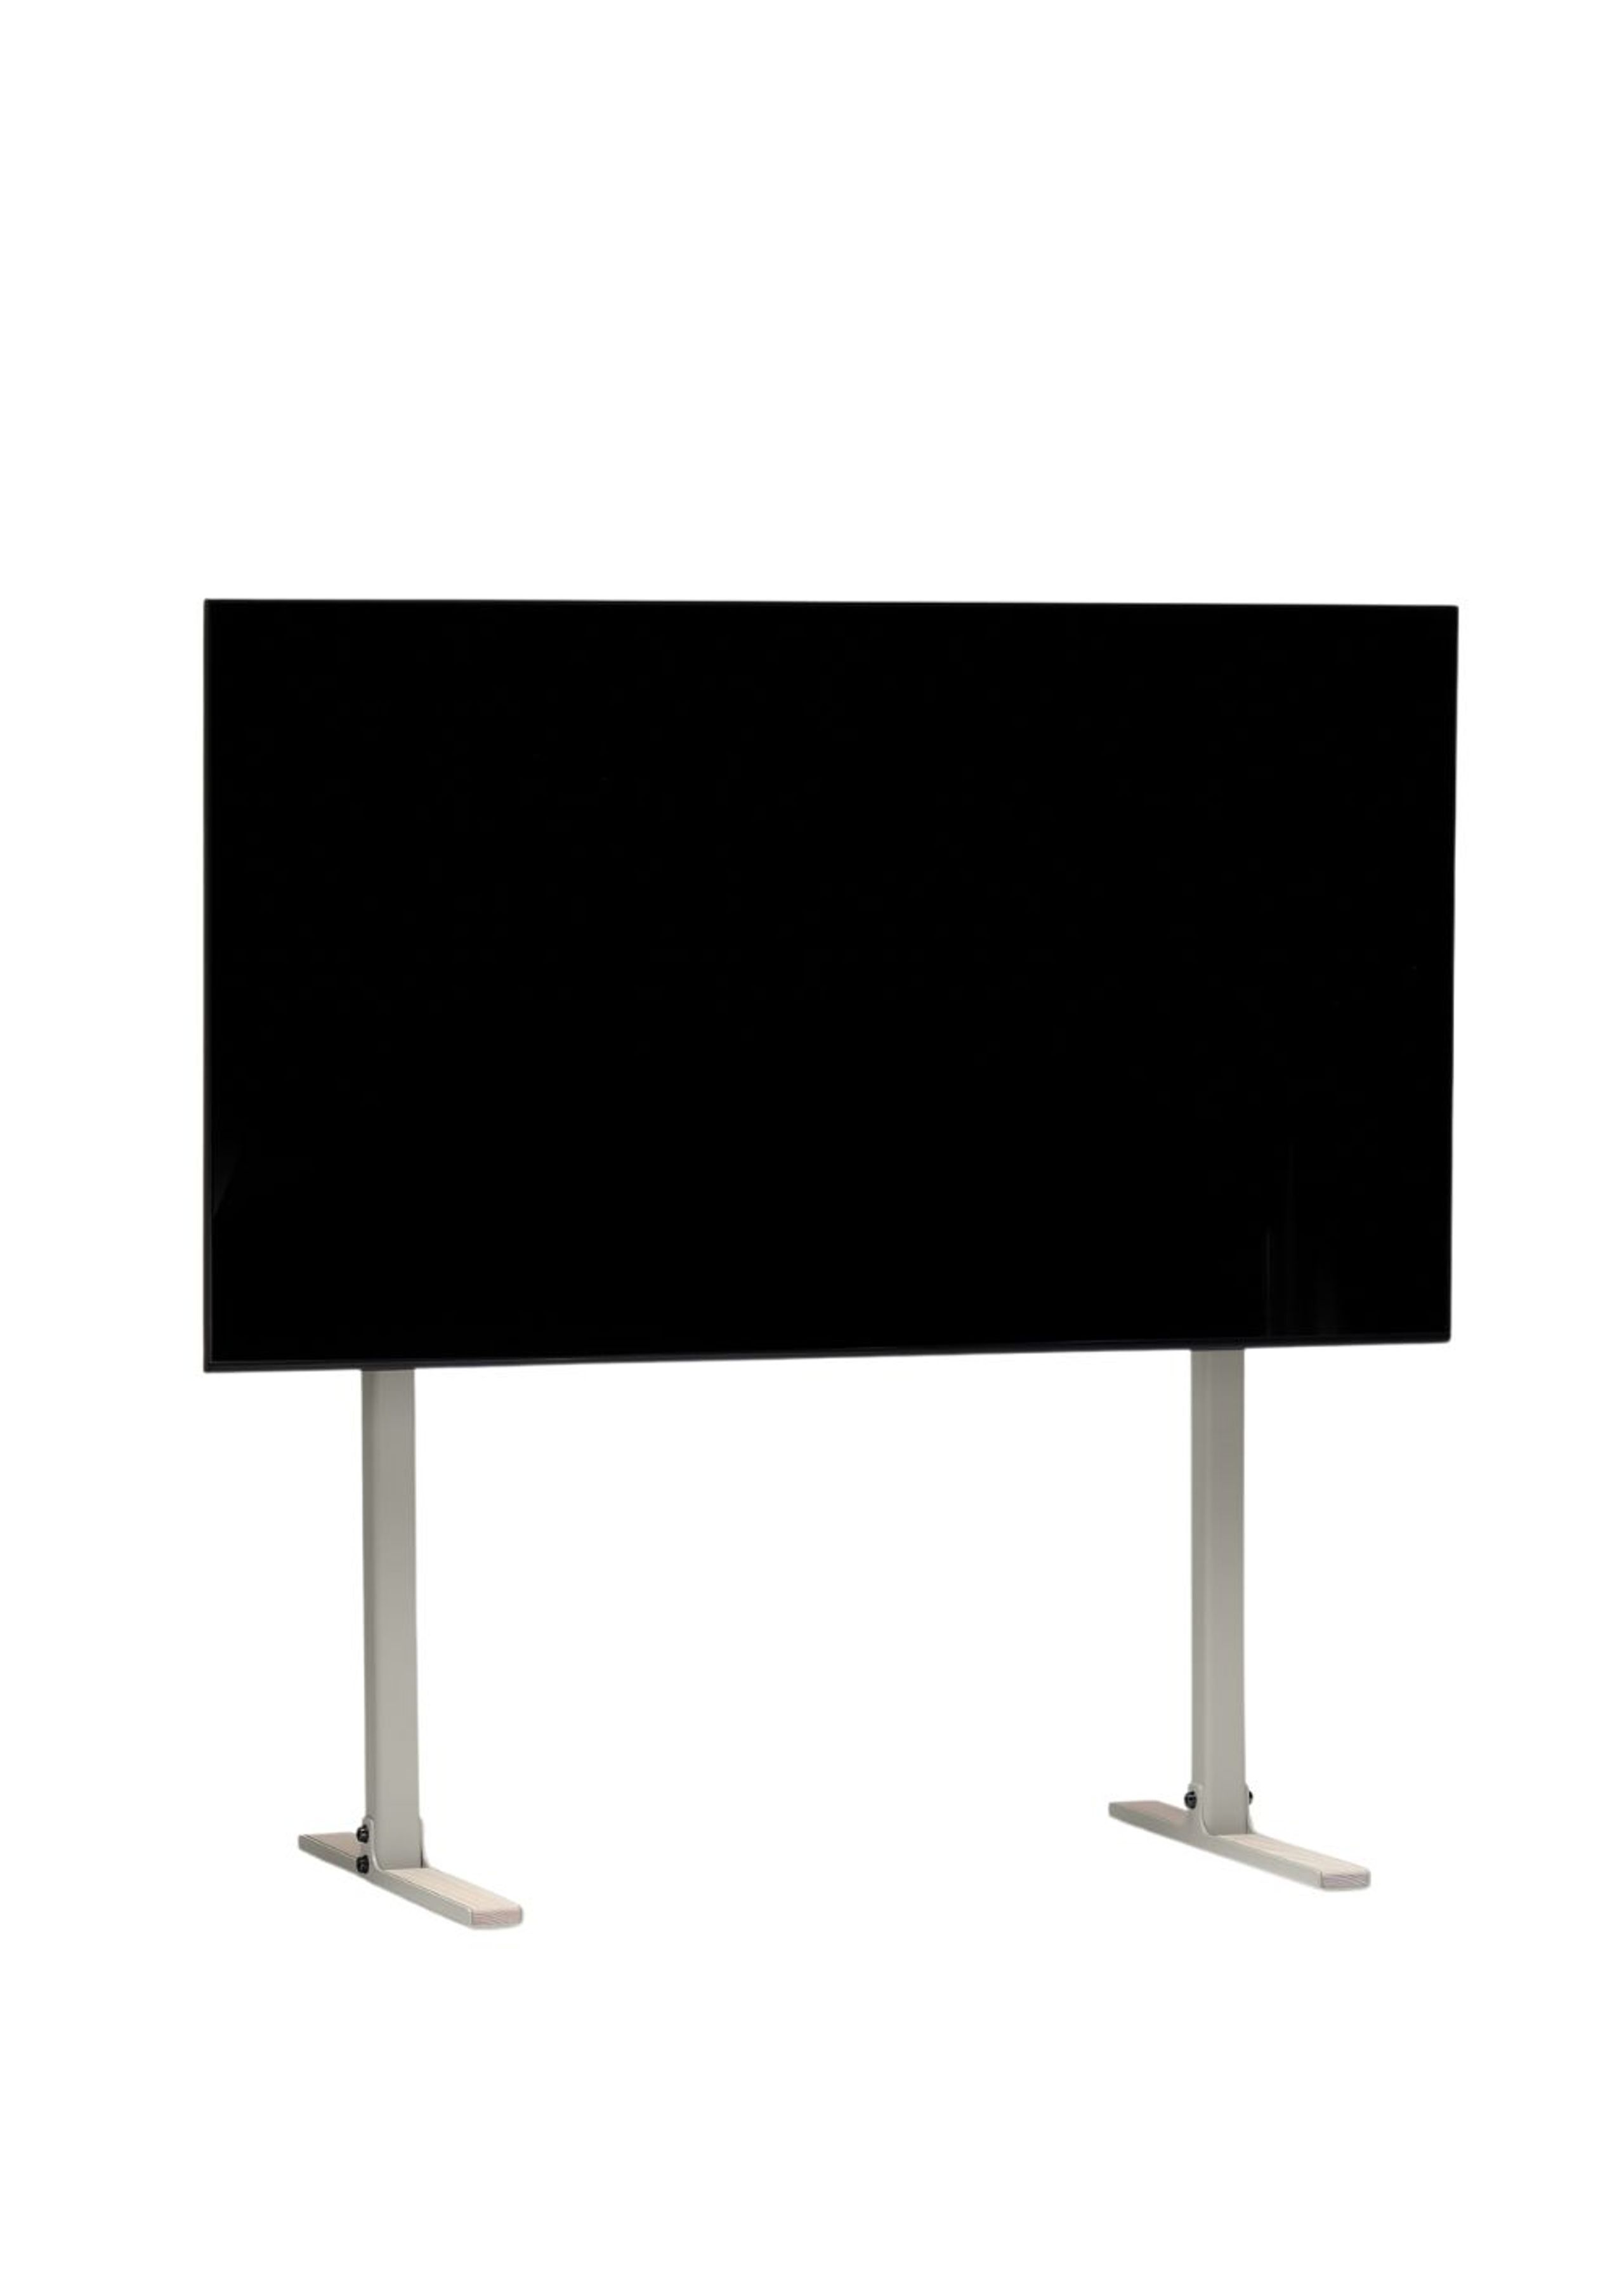 https://images.byflou.com/13/3/images/products/0/0/pedestal-tv-stander-straight-tall-stand-mushroom-8200619.jpeg